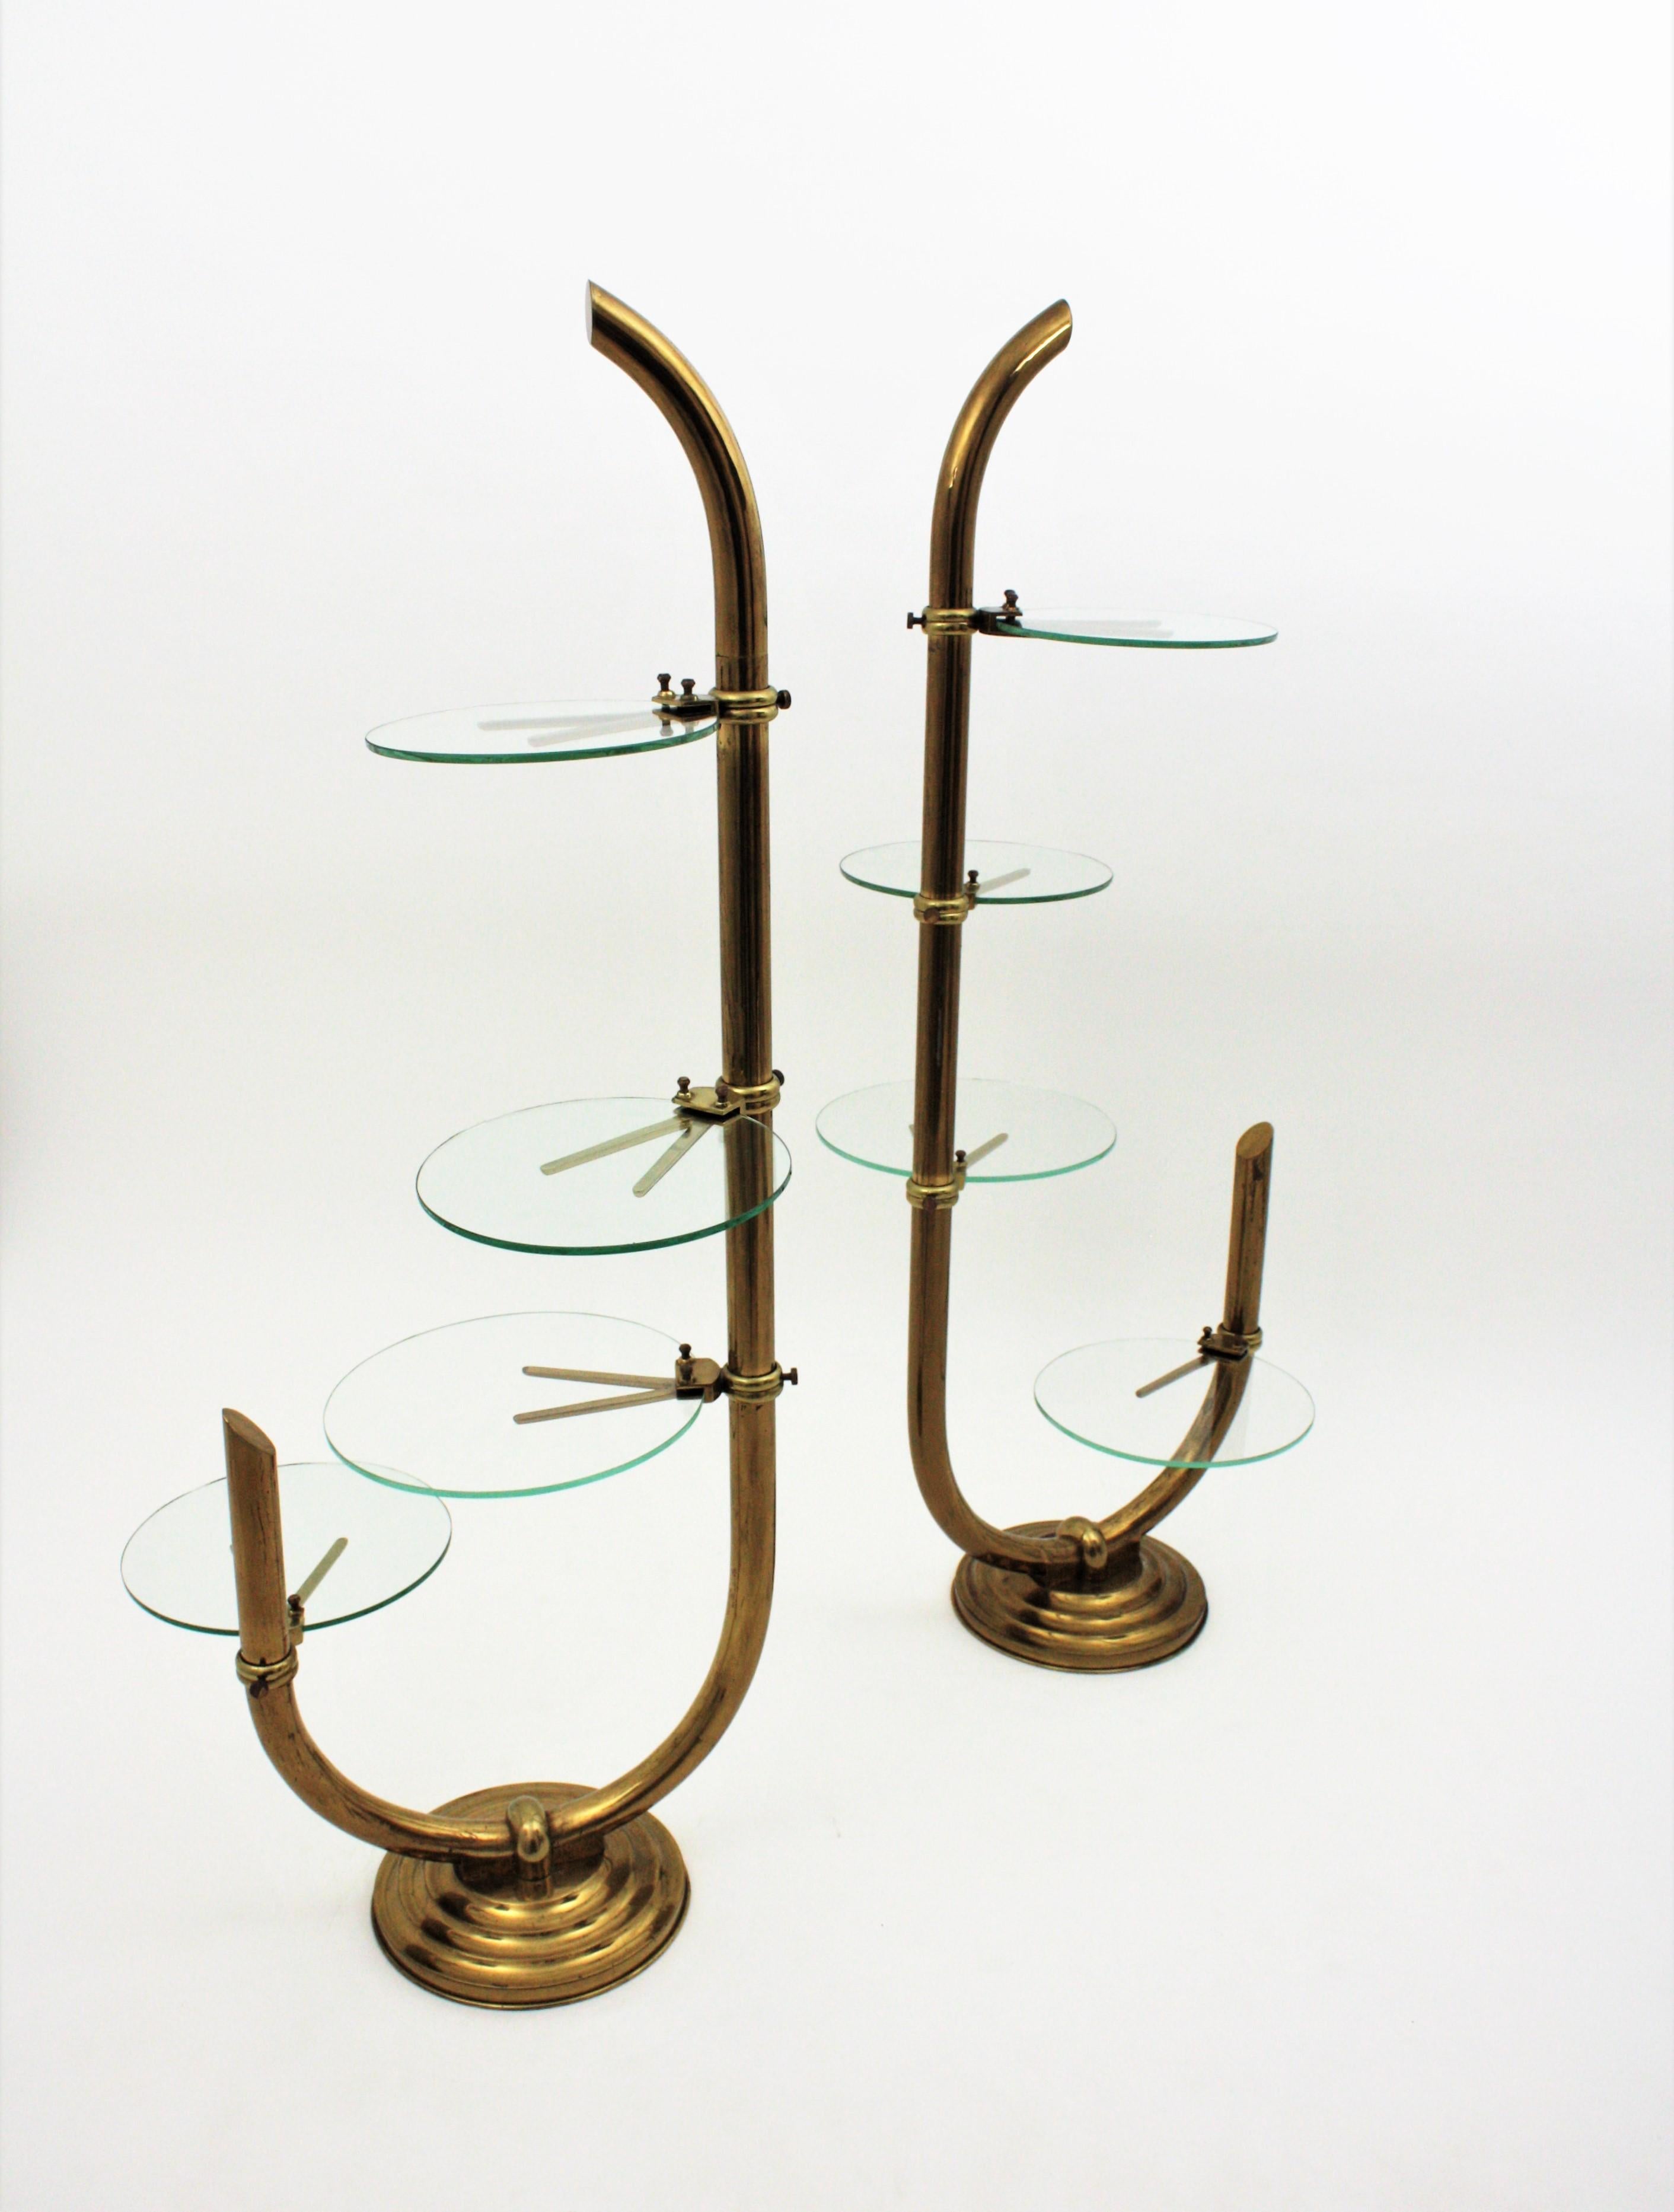 Art Deco Brass Floor Shop Display Stands / Swivel Etageres with Shelves in Glass 6